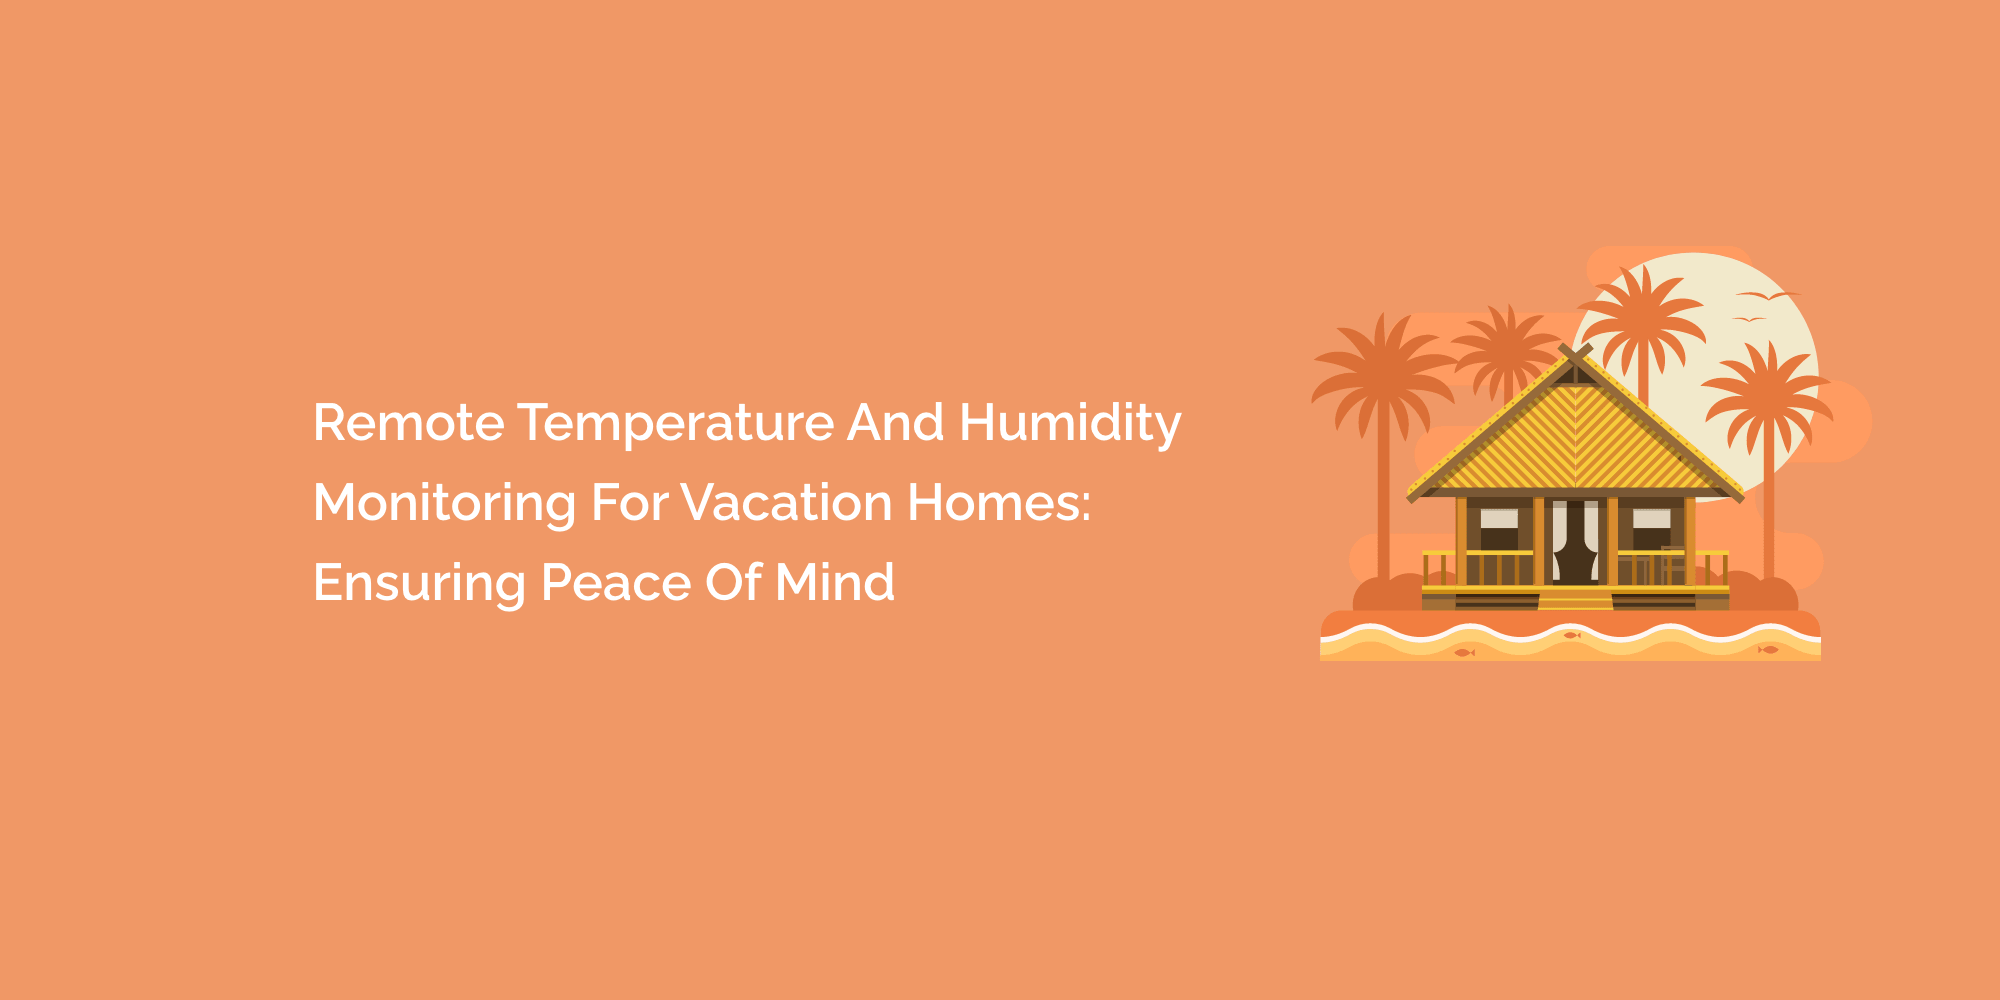 Remote Temperature and Humidity Monitoring for Vacation Homes: Ensuring Peace of Mind